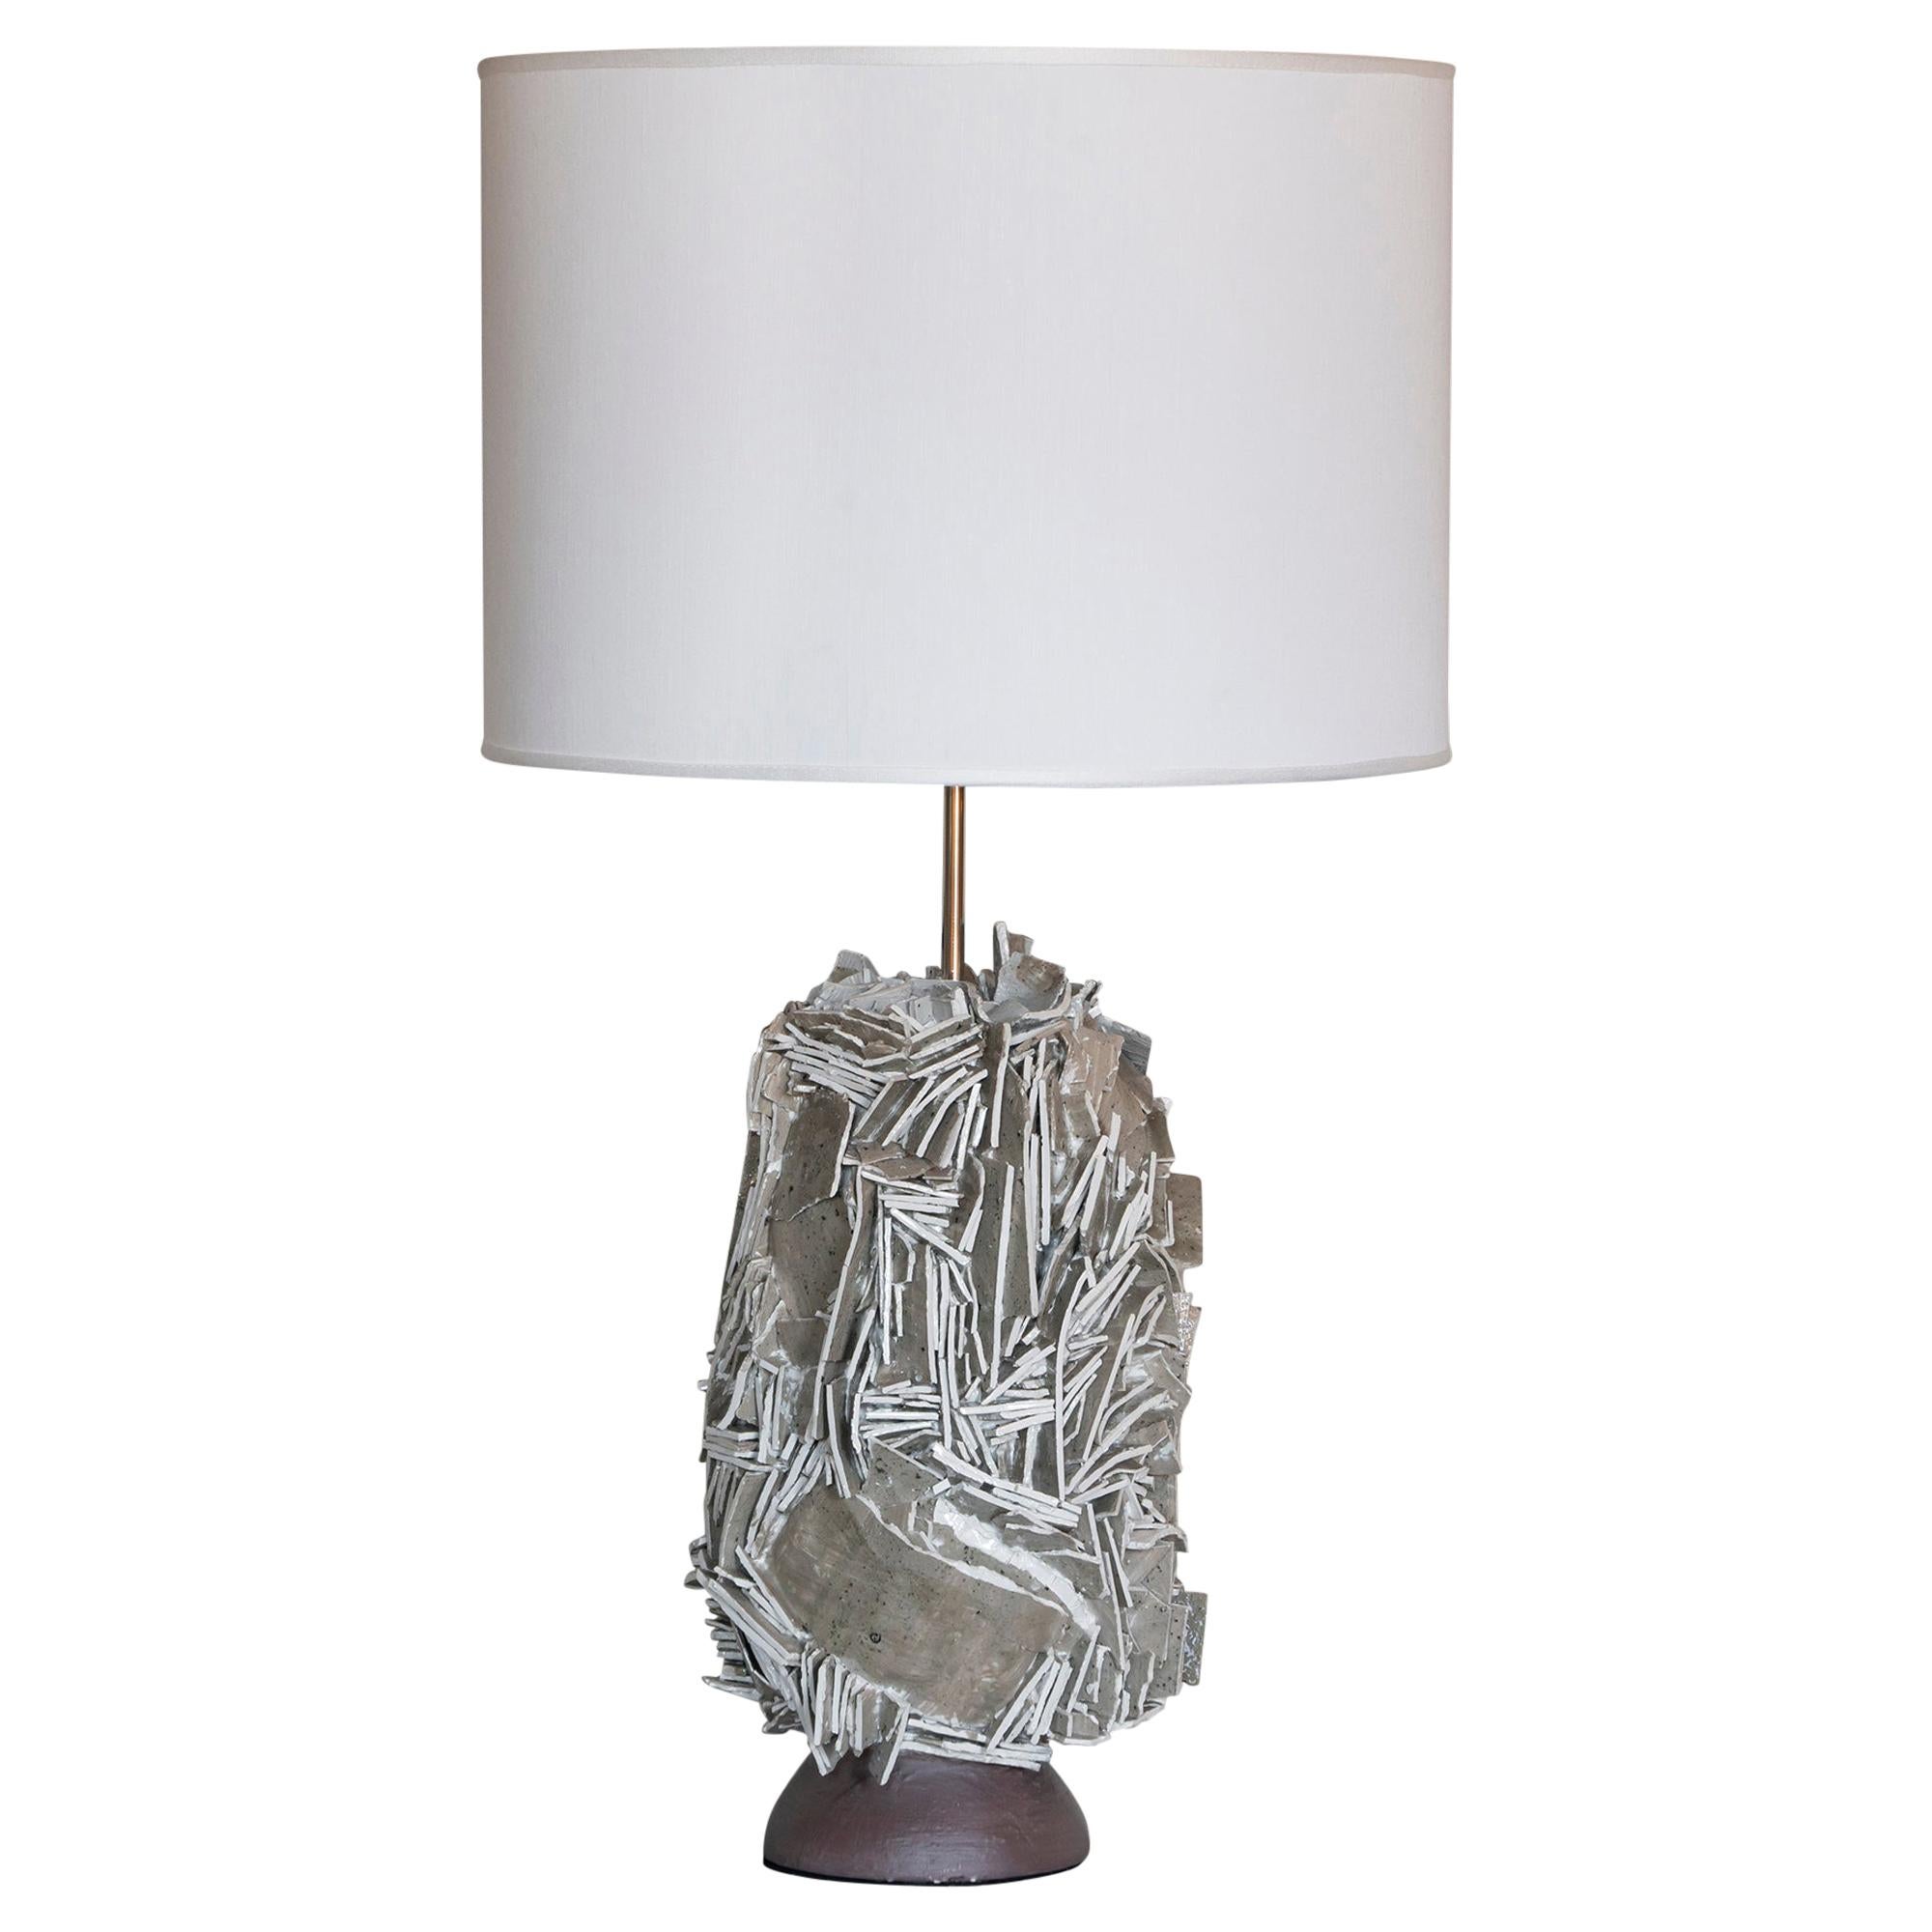 One of a Kind Artistic Taupe Glazed and Raw Ceramic Table Lamp, Italy, 2020